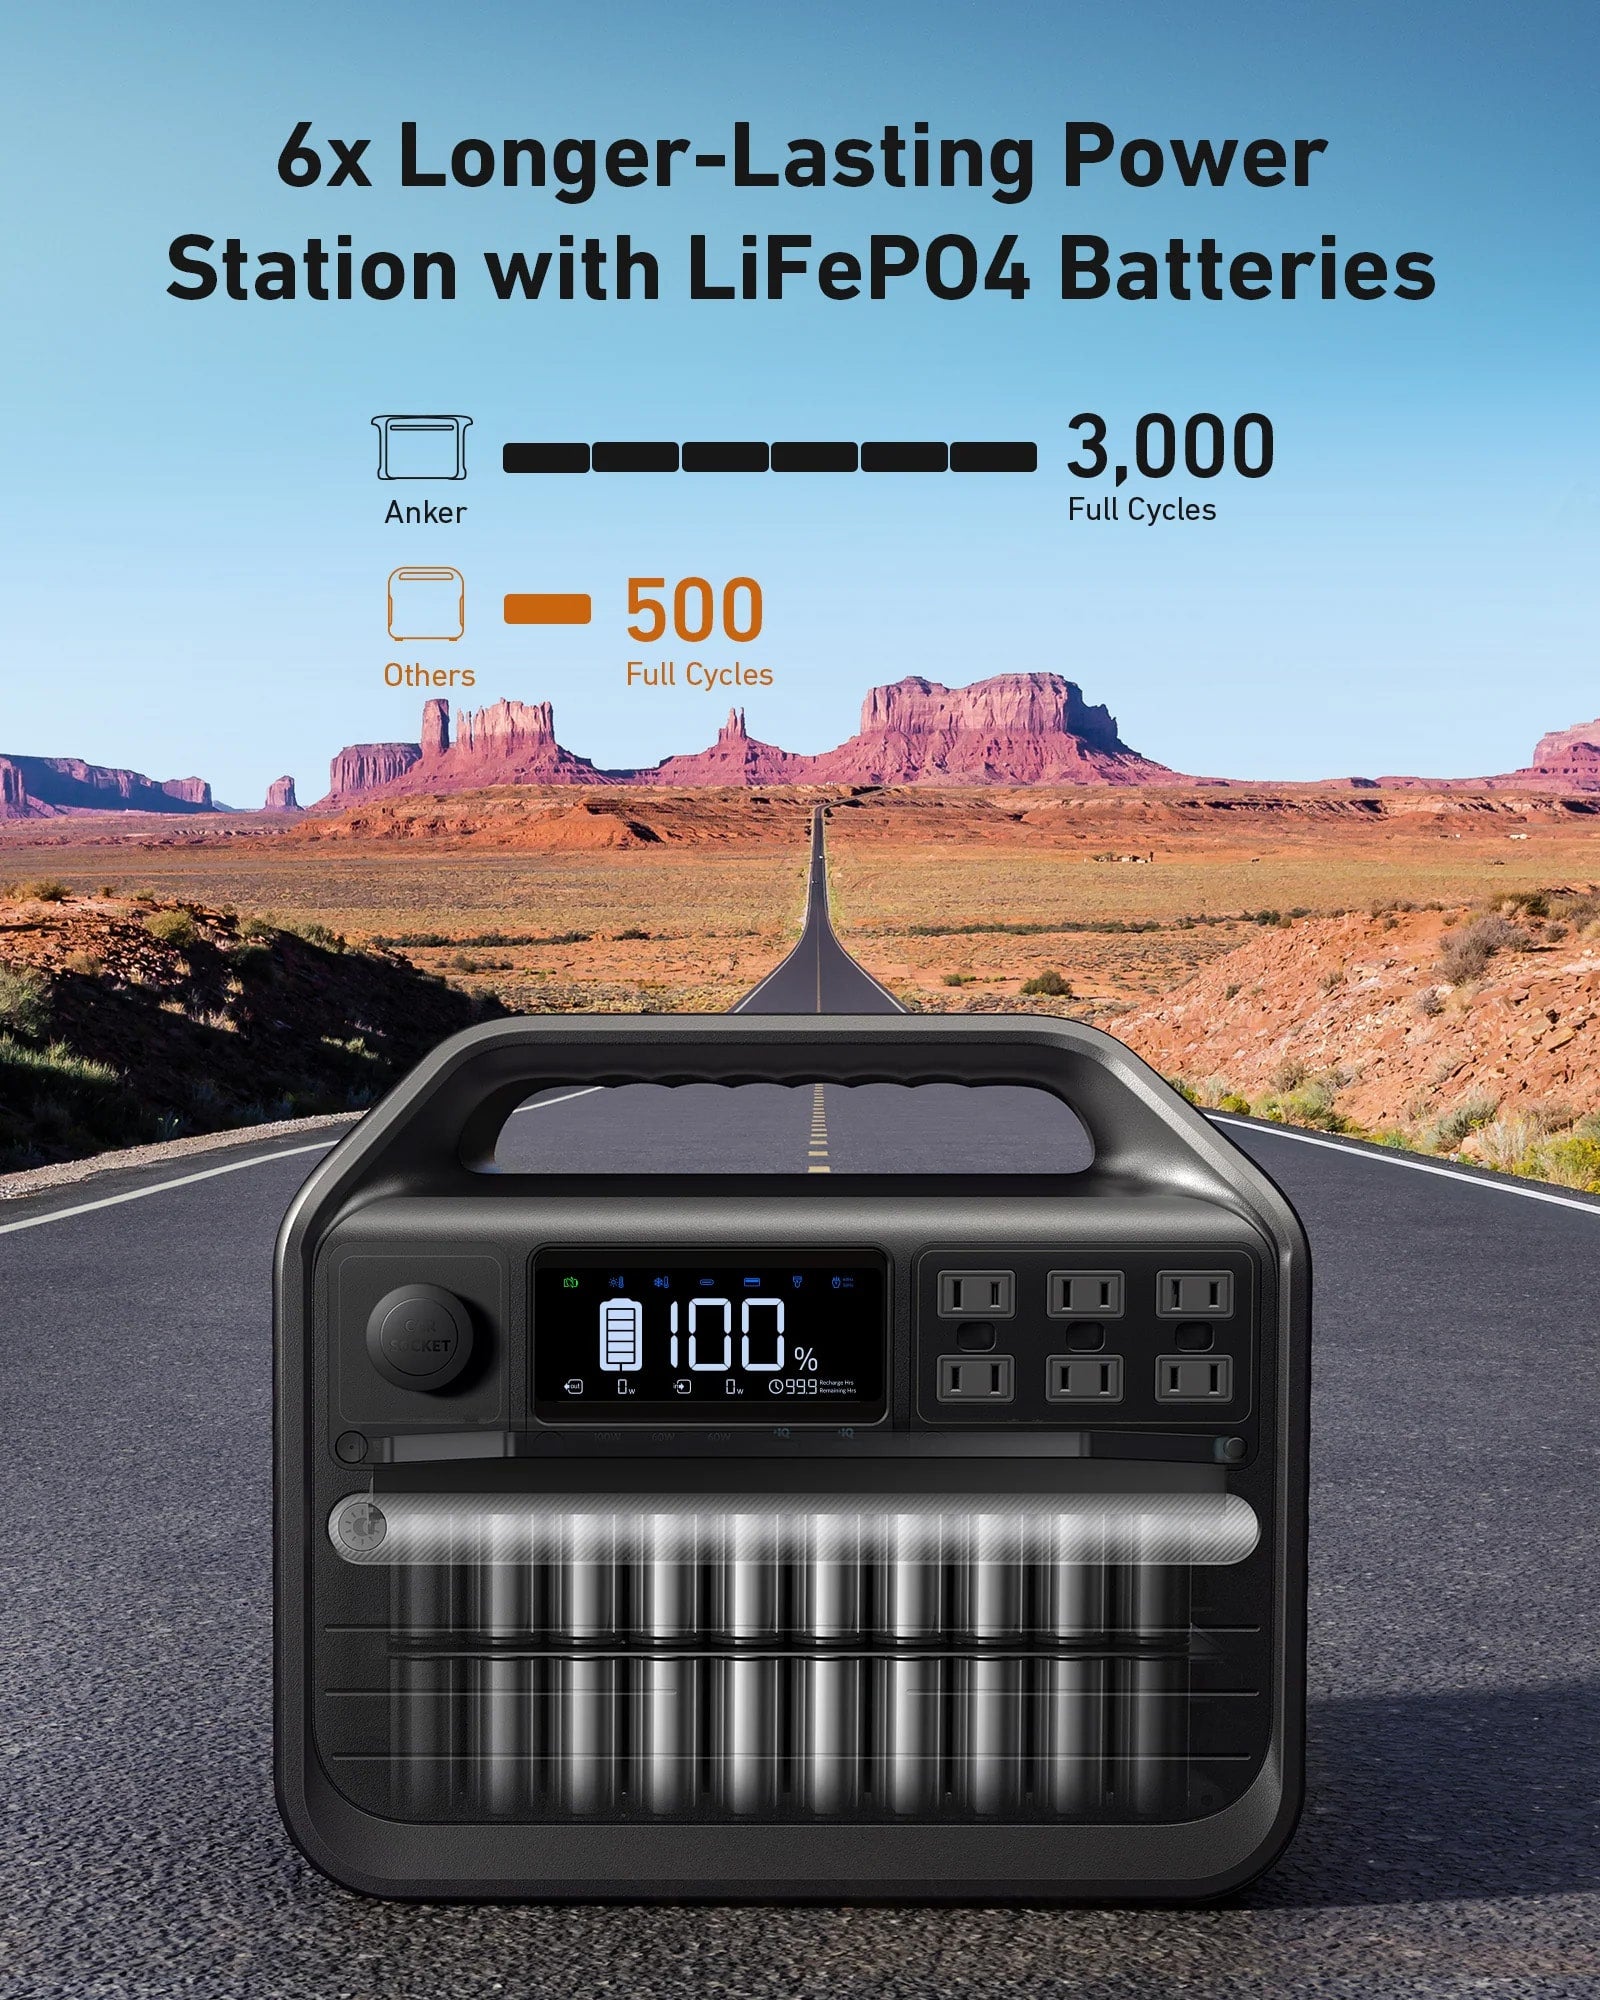 The Anker PowerHouse Is A 6x Longer-Lasting Power Station With LiFEP04 Batteries